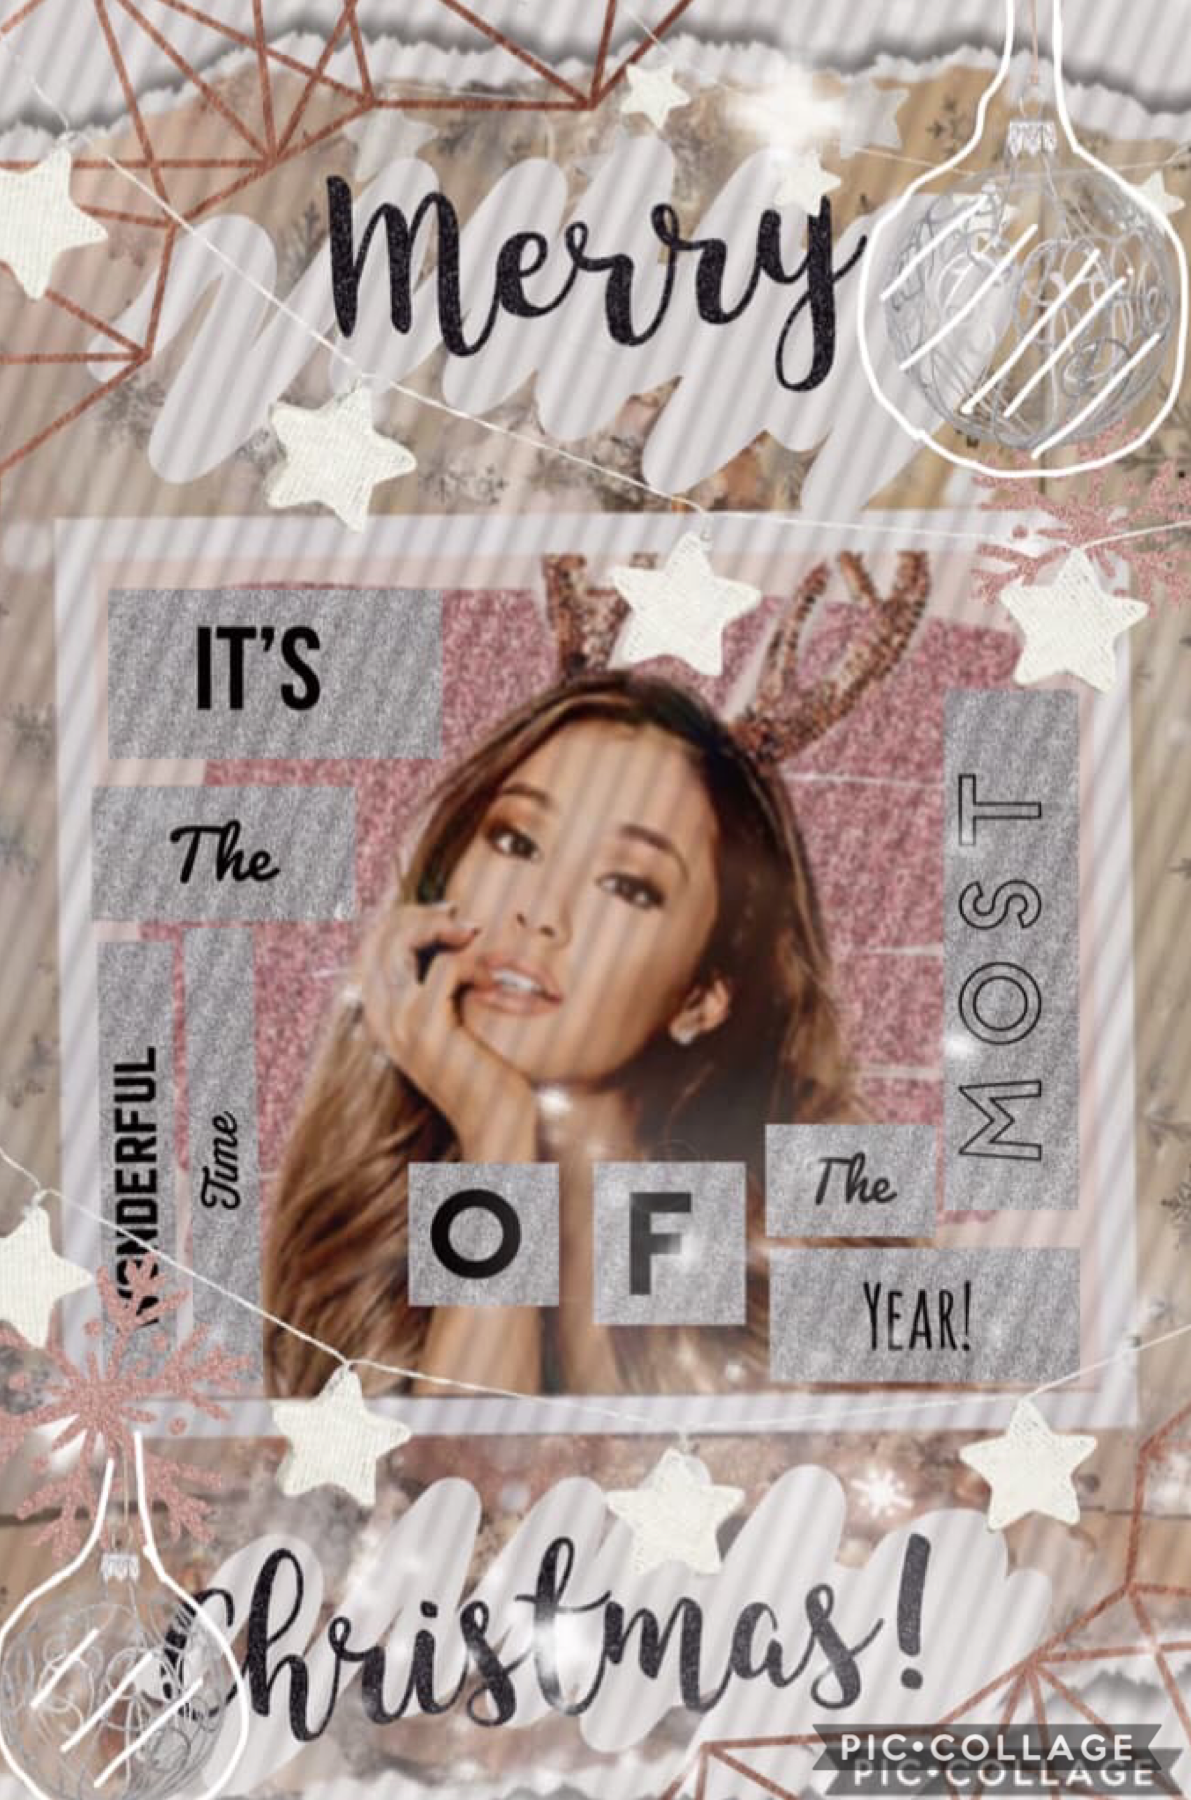 COLLAB WITH THE GORGEOUS SEACRITTER8! omg this girl deserves the whole world to follow her so make sure you do! Loved collabing with you 💕💕
Aotd: Favourite singer?
Qotd: Ariana Grande or Billie Eilish! 